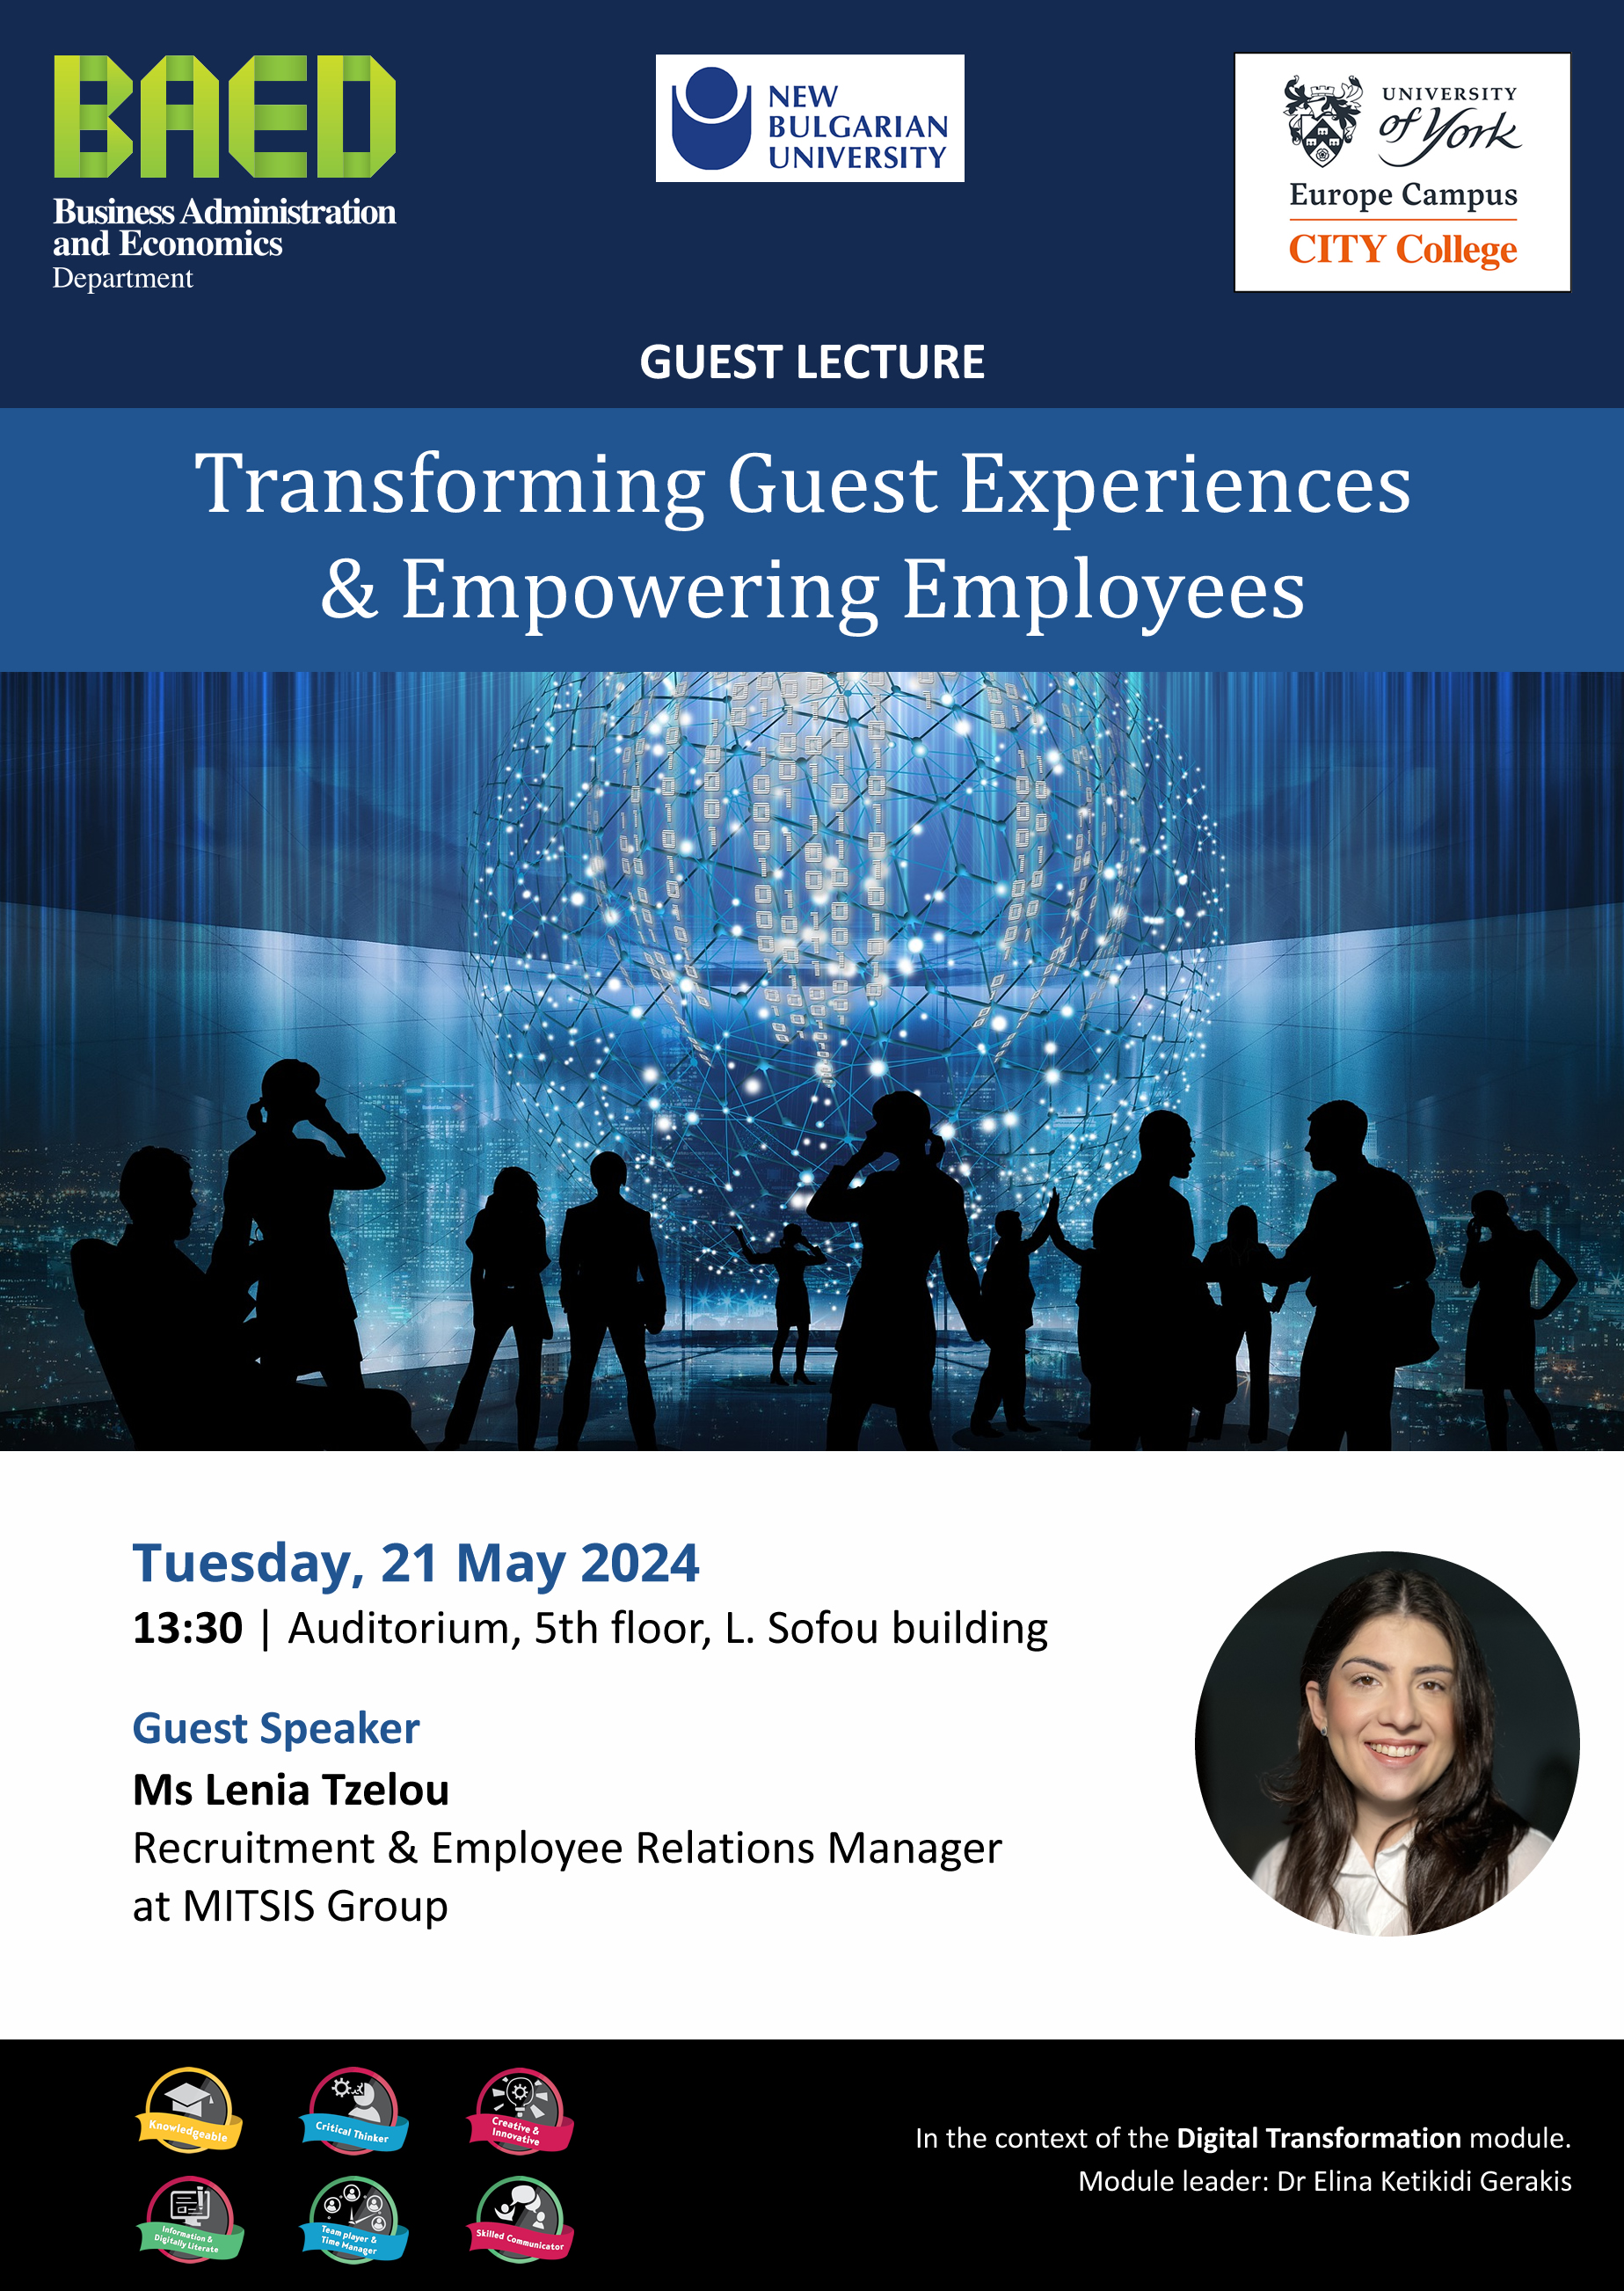 Guest Lecture - Transforming Guest Experiences and Empowering Employees